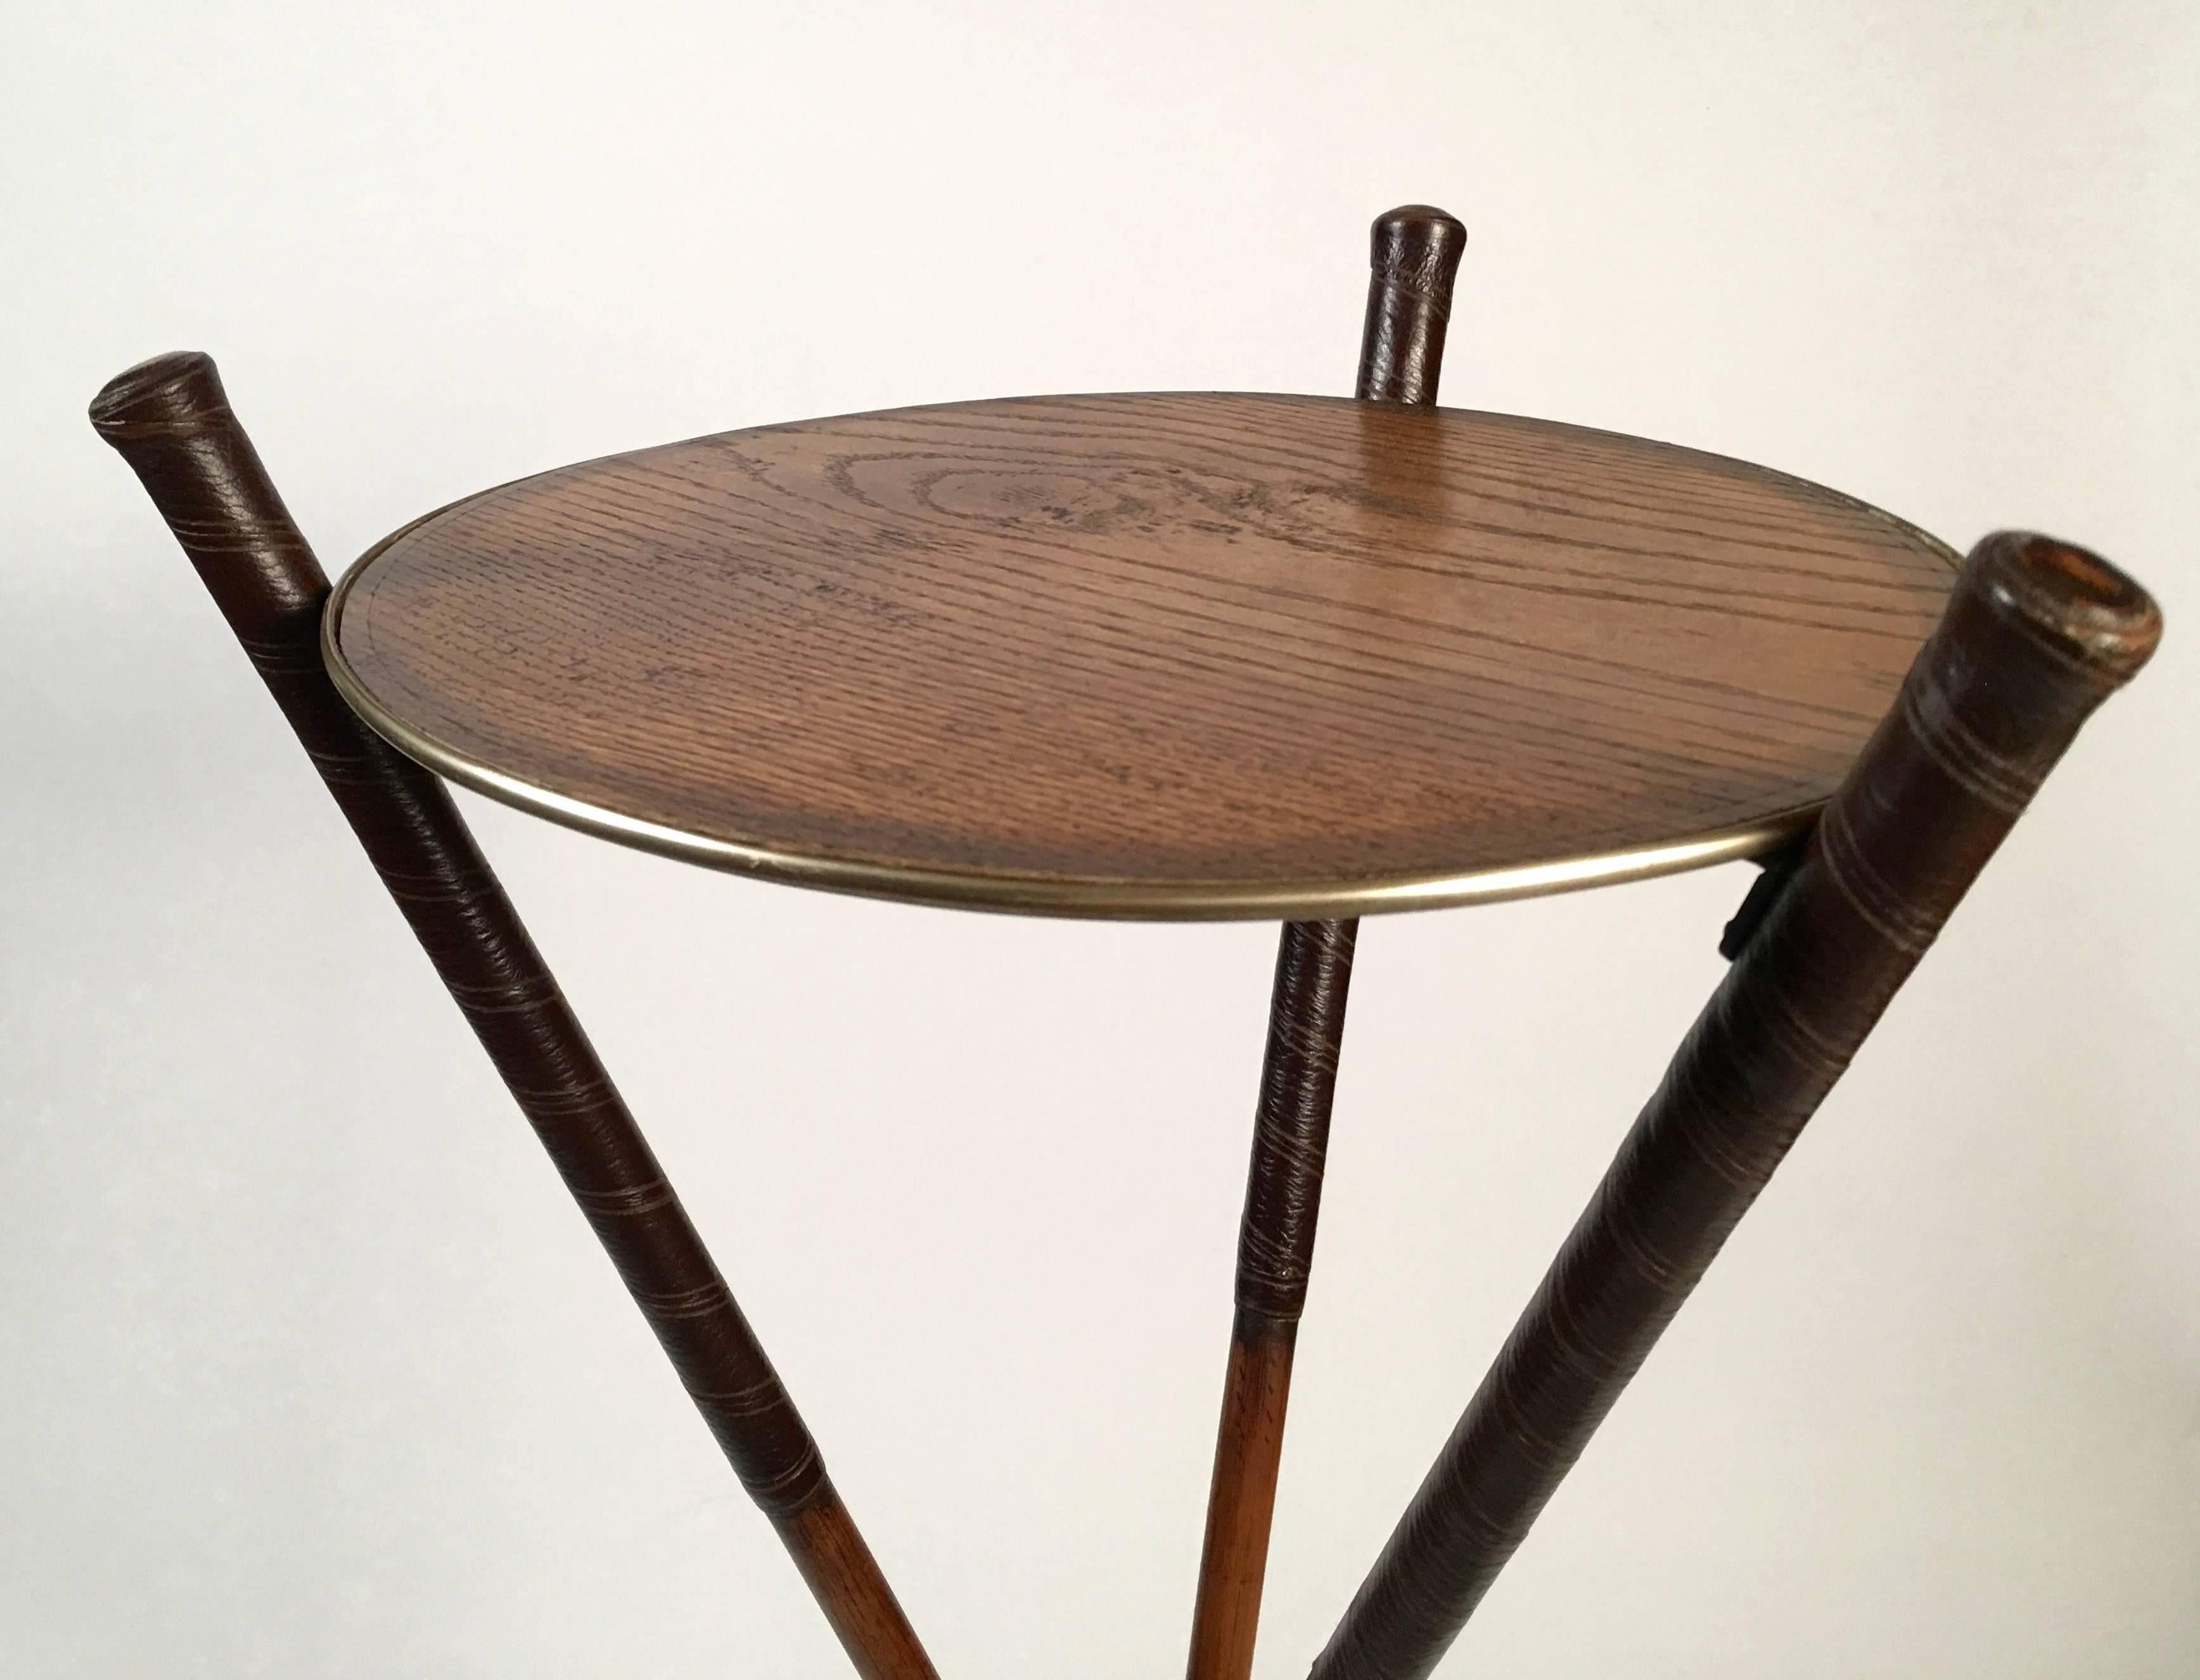 An inventive and well made drinks table made from three vintage Scottish golf clubs, with hardwood shafts, leather wrapped grips and metal club heads (each signed by a different maker), intersecting with decorative metal hardware, the round stained